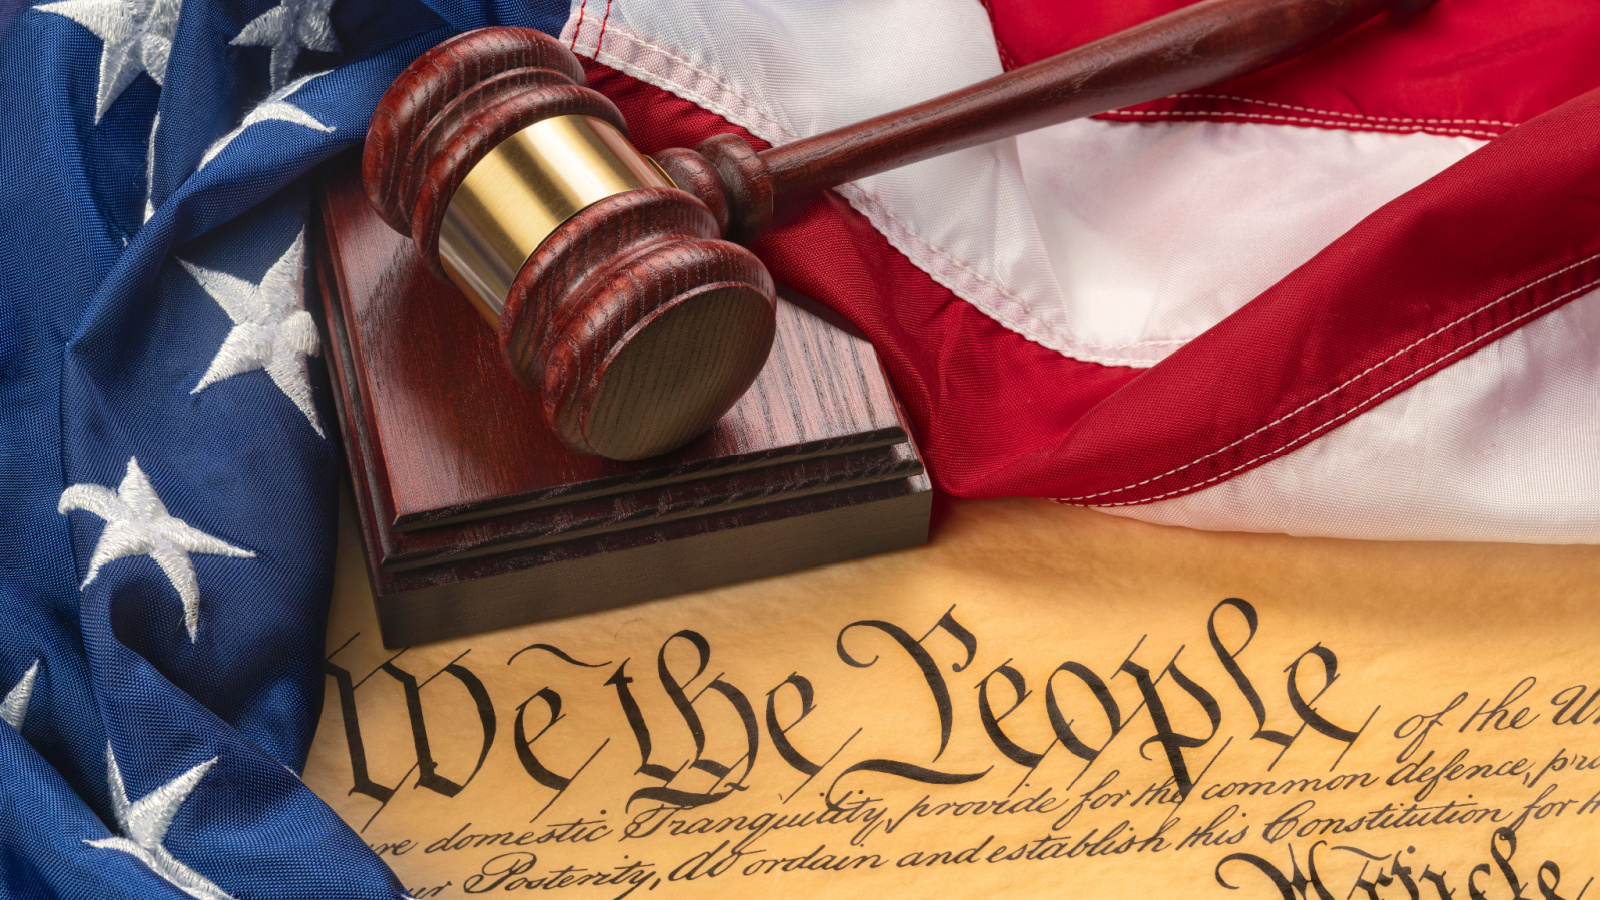 image credit: Joe-Belanger/Shutterstock <p><span>The 13th Amendment to the U.S. Constitution officially abolished slavery throughout the United States. Its ratification marked a pivotal moment in American history, legally ending centuries of enslavement. This amendment signified a new beginning for millions, though the road to true equality remained long and fraught. It laid the foundational stone for civil rights in America.</span></p>